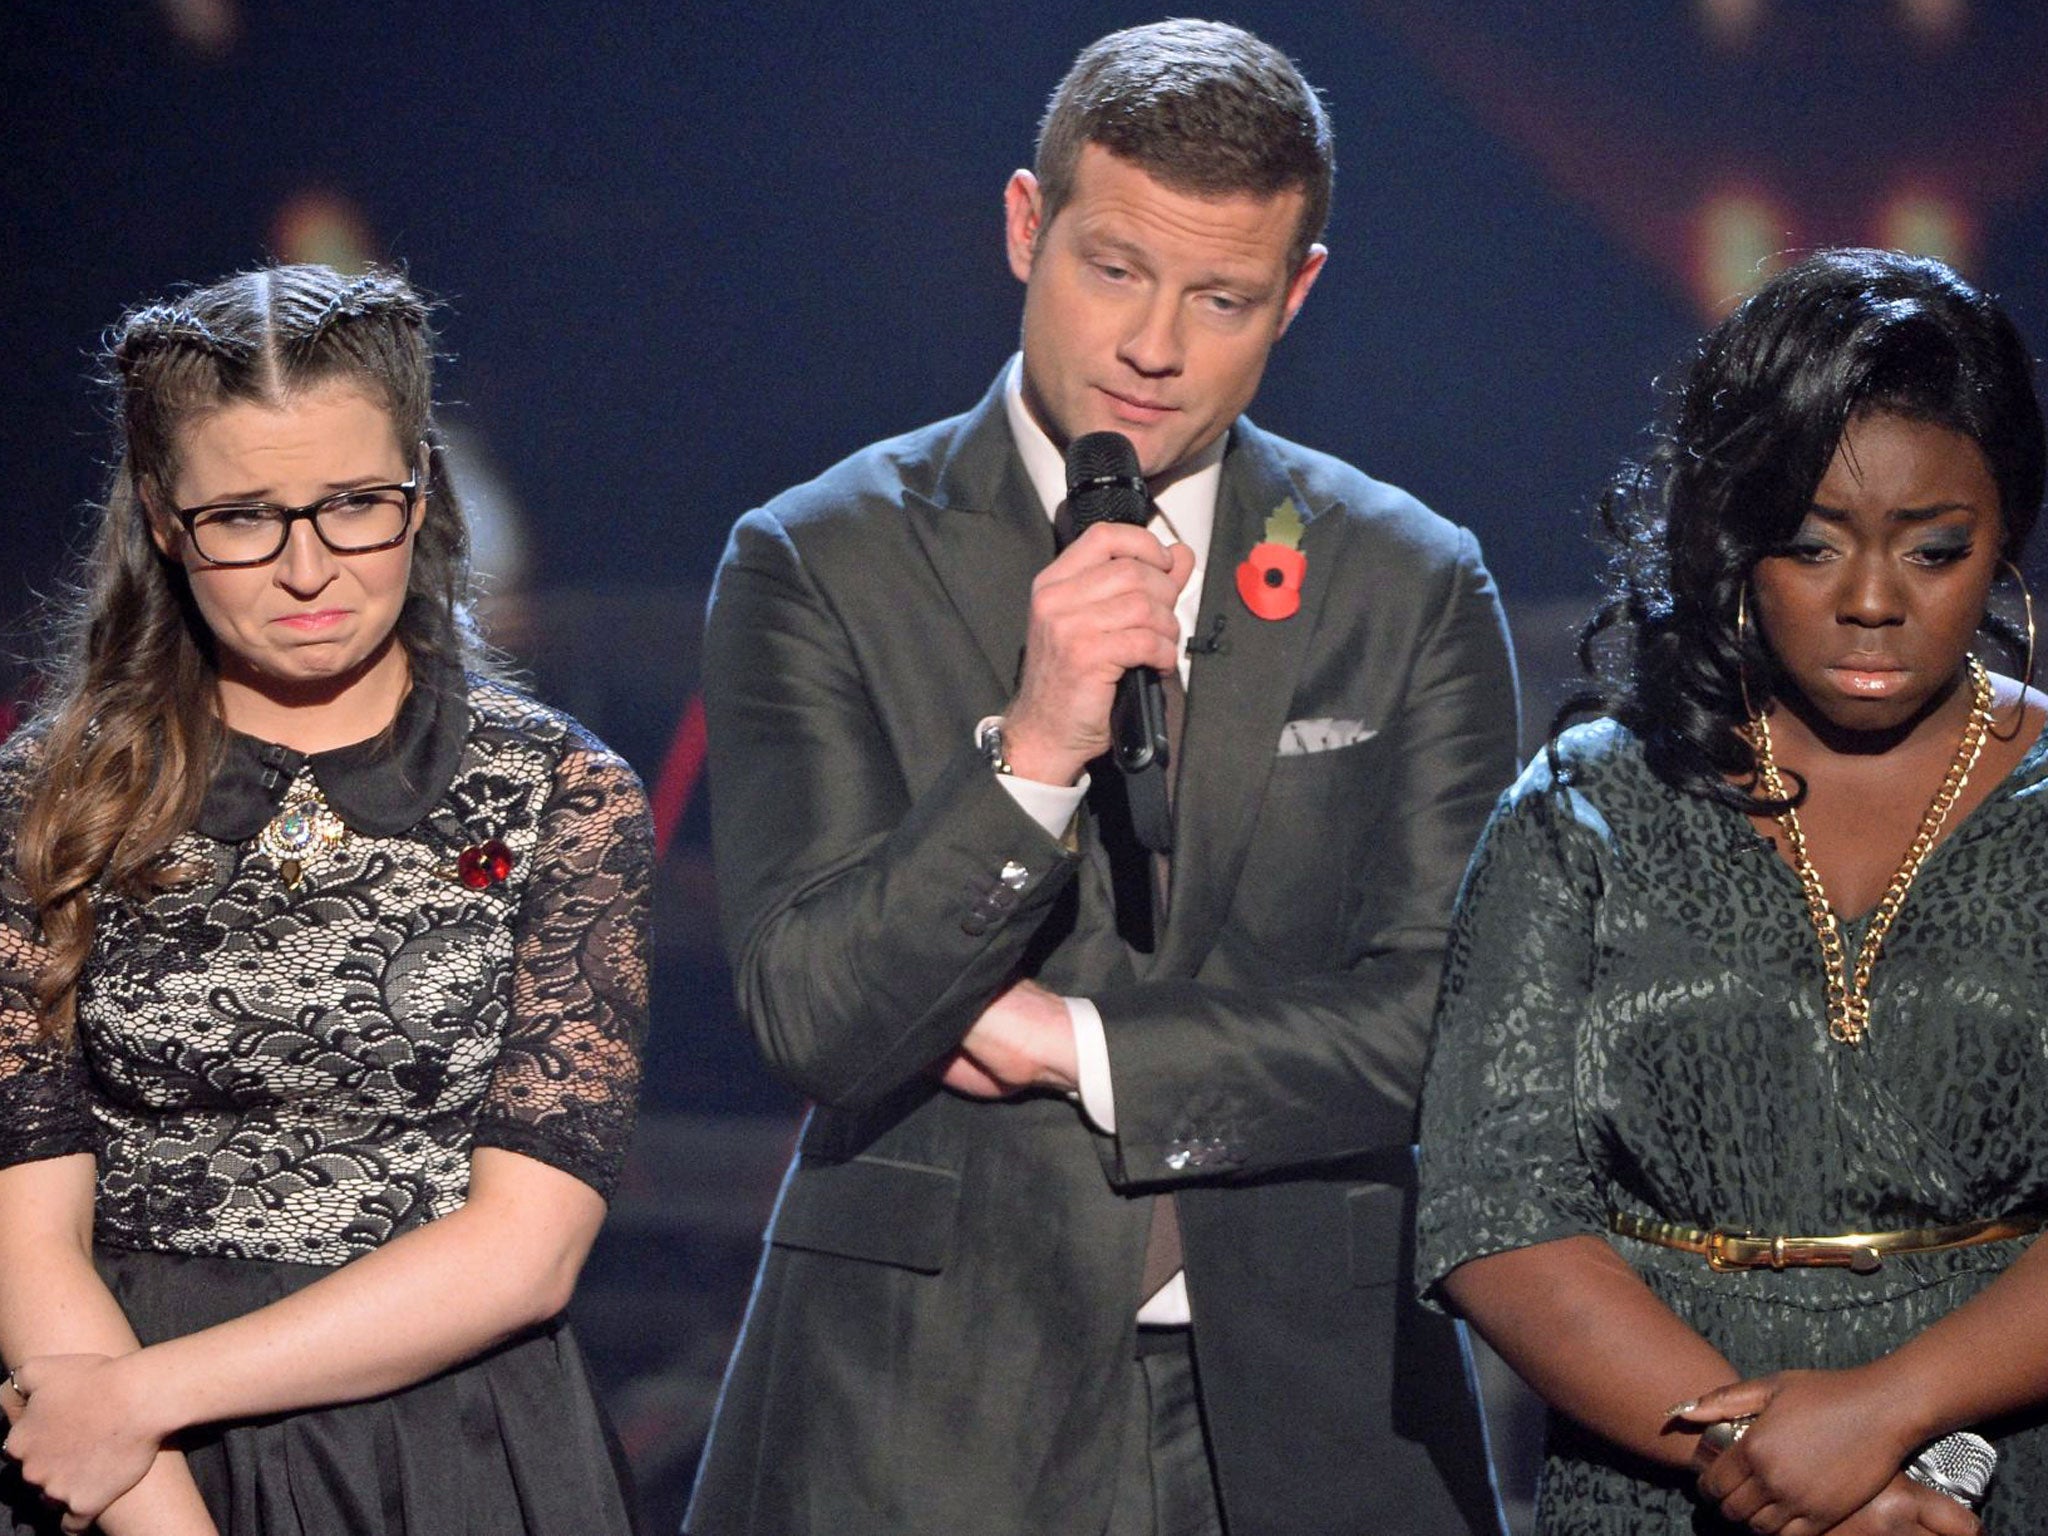 Dermot O'Leary with Hannah Barrett and Abi Alton, who was voted off 'The X Factor'